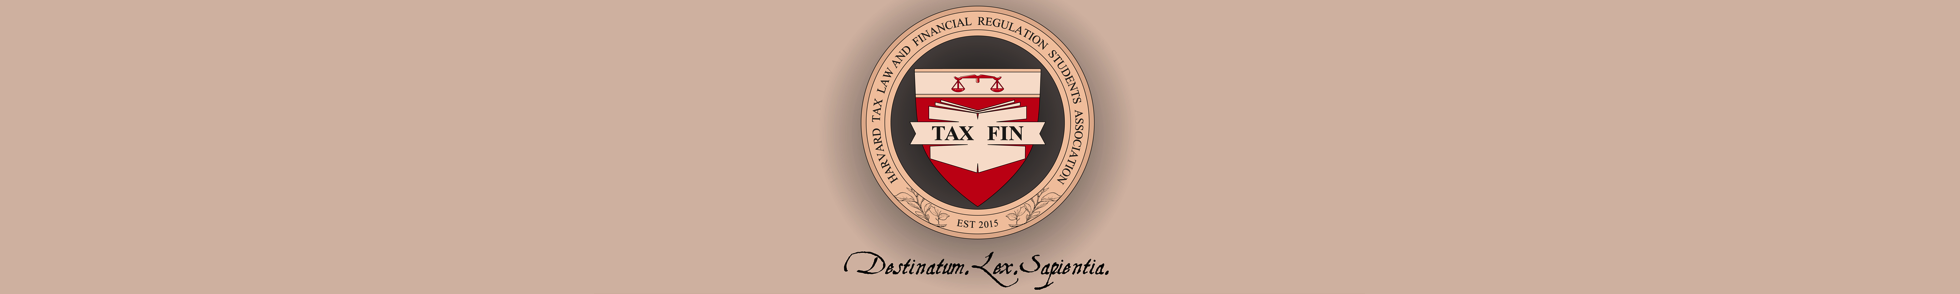 HLS Tax Law and Financial Regulation Students Association